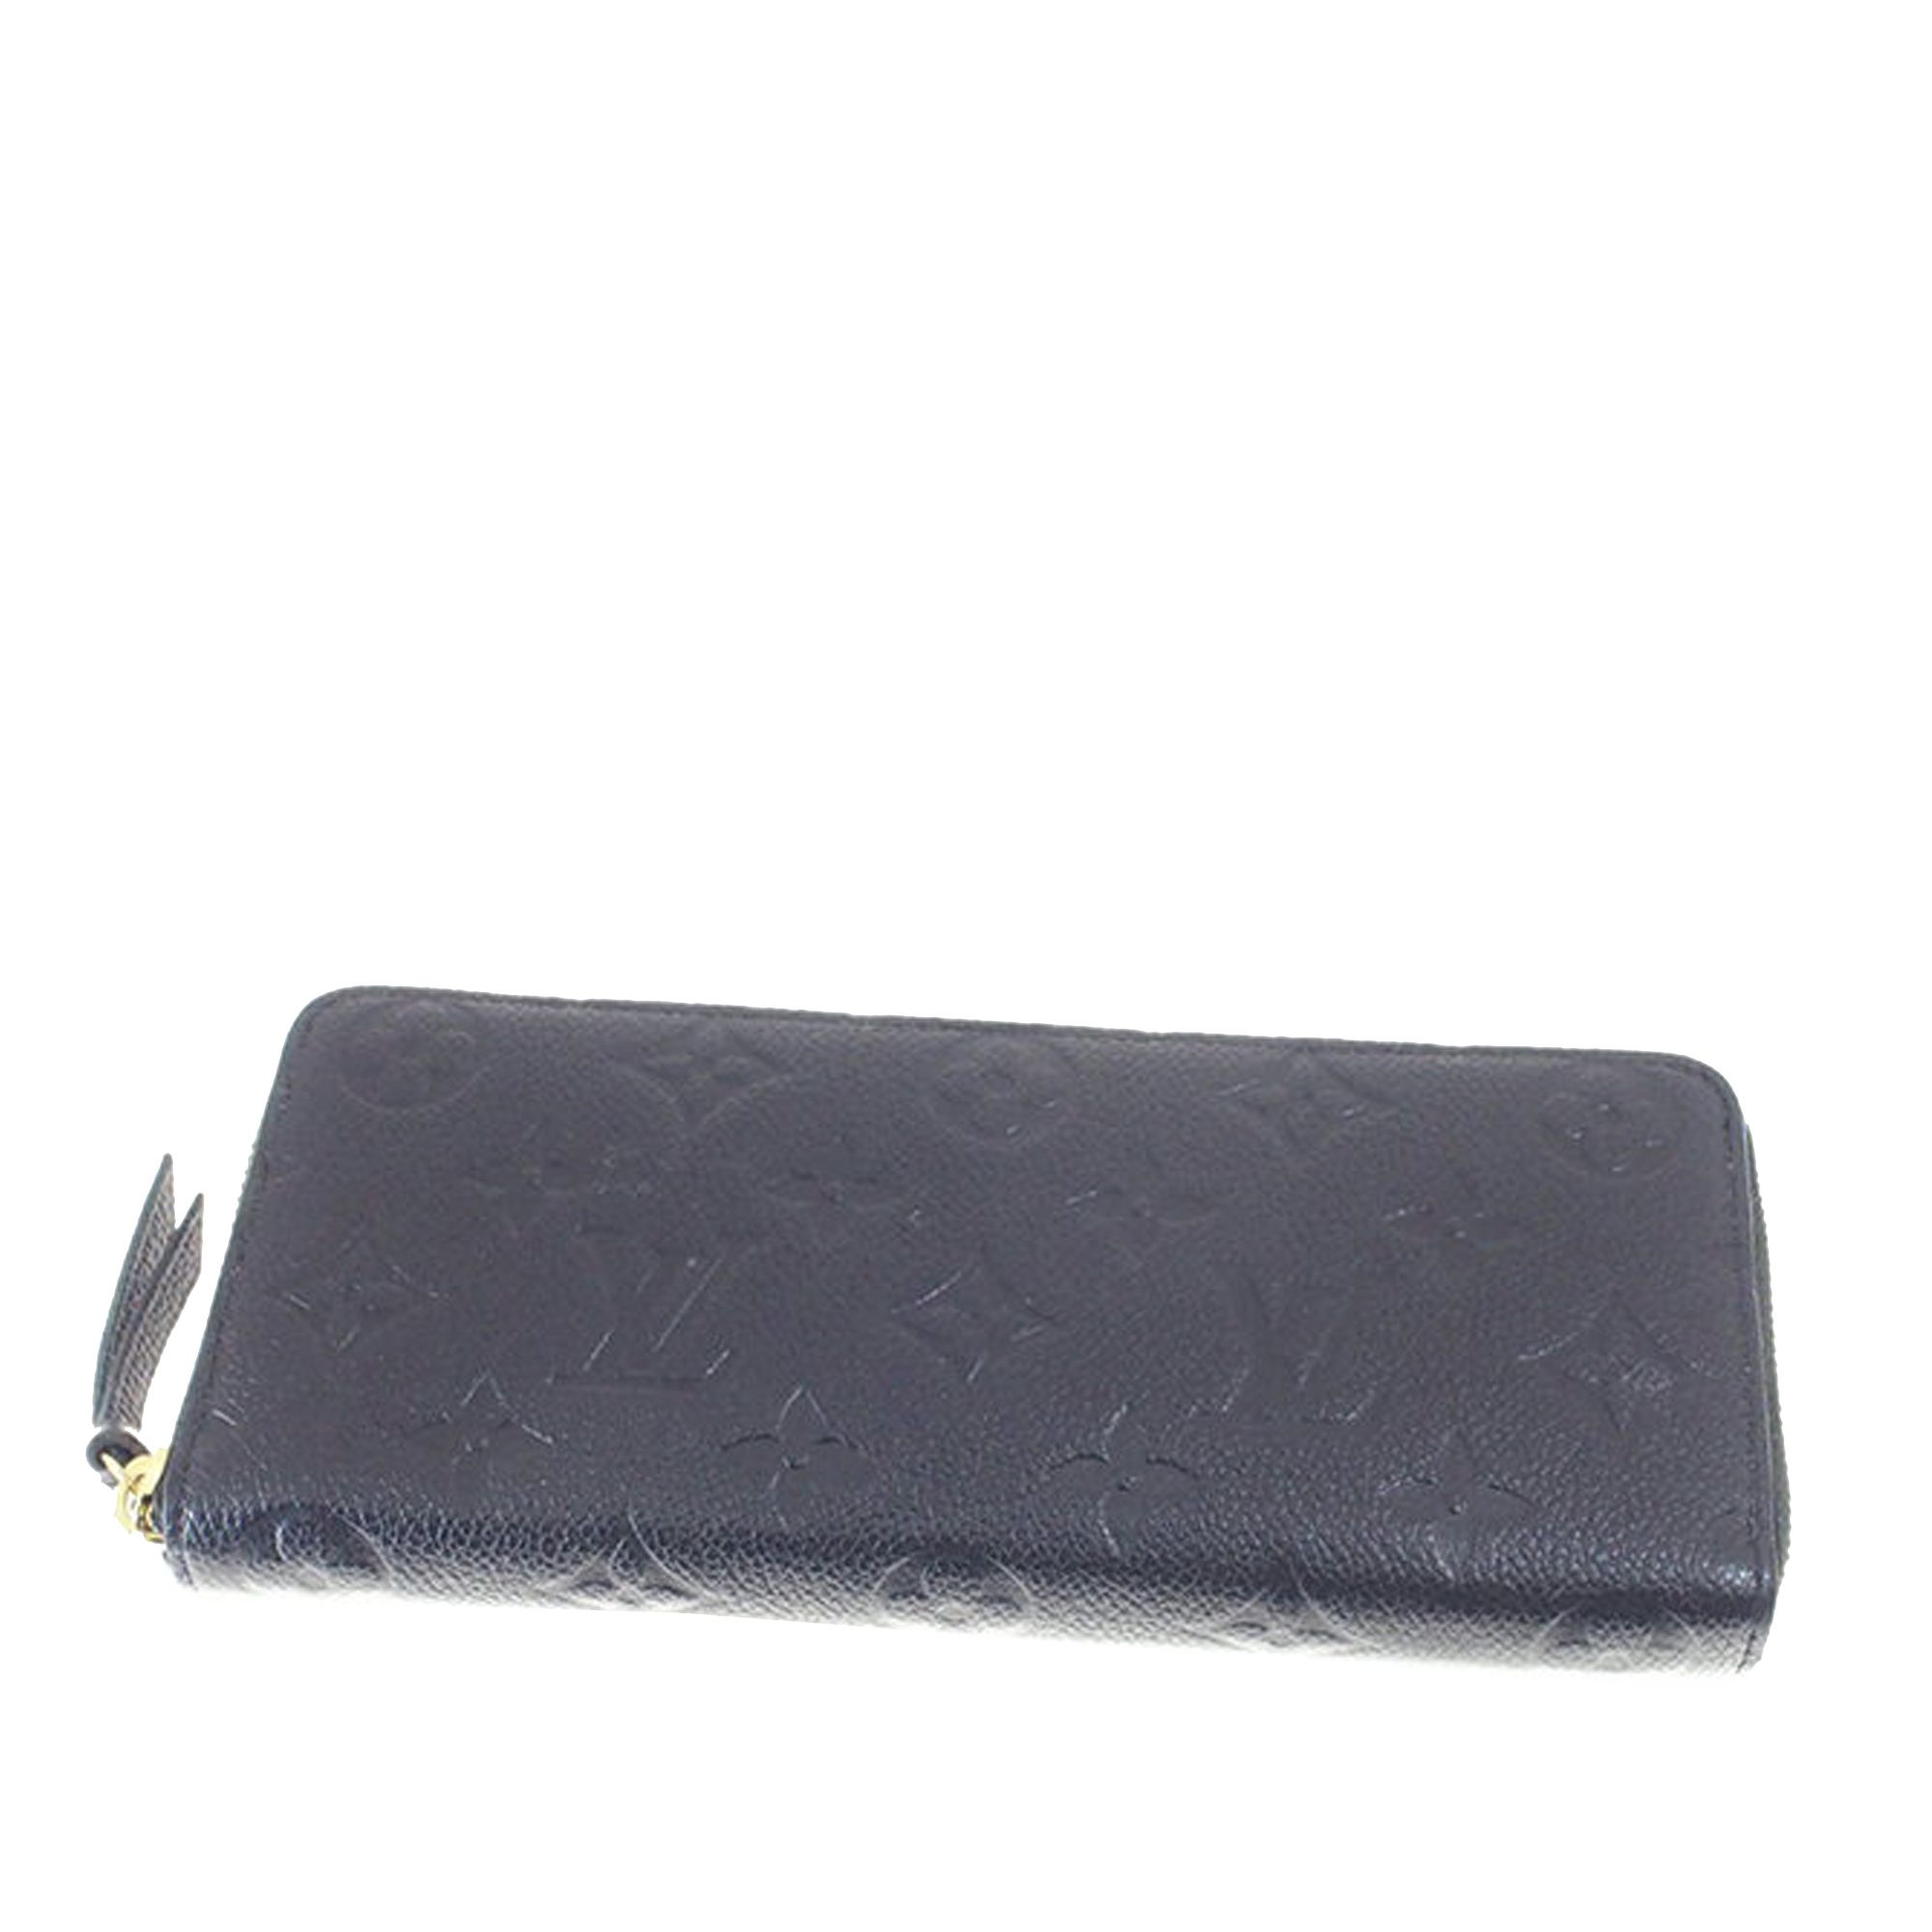 VINTAGE. RRP AS NEW. The Monogram Empreinte long wallet features a leather body, a zip around closure, and an interior zip and slip pockets.
Dimensions:
Length 10cm
Width 20cm
Depth 1cm

Original Accessories: Dust Bag

Color: Black
Material: Leather x Monogram Empreinte
Country of Origin: France
Boutique Reference: SSU104644K1342


Product Rating: GoodCondition